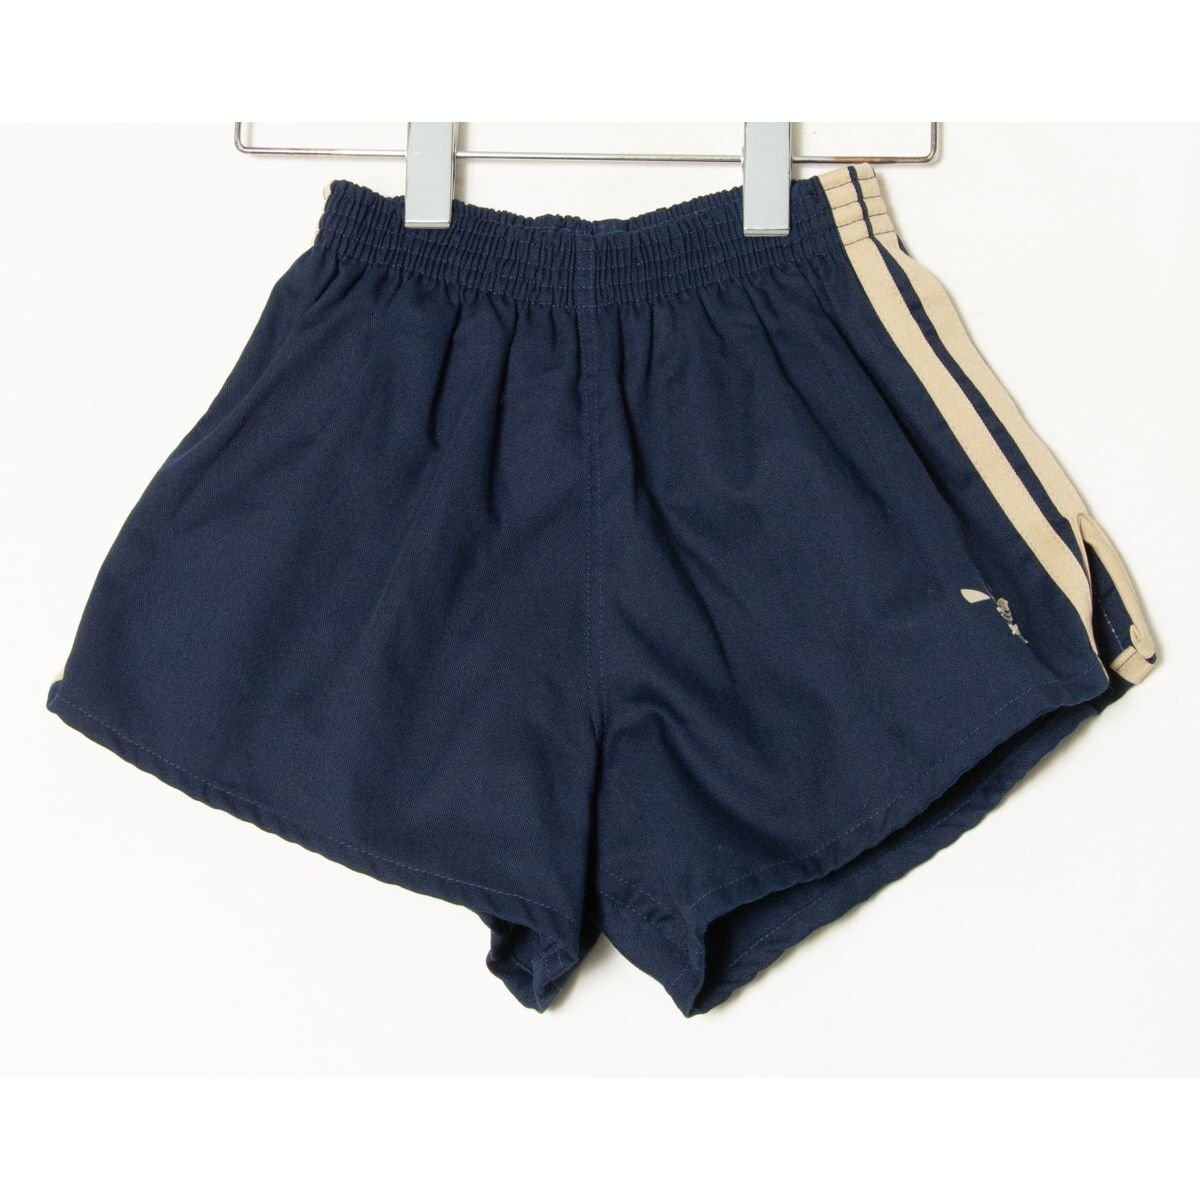 [1 jpy start ] mail service 0 adidas Adidas short pants inner attaching running wear polyester cotton navy blue navy S USA made 